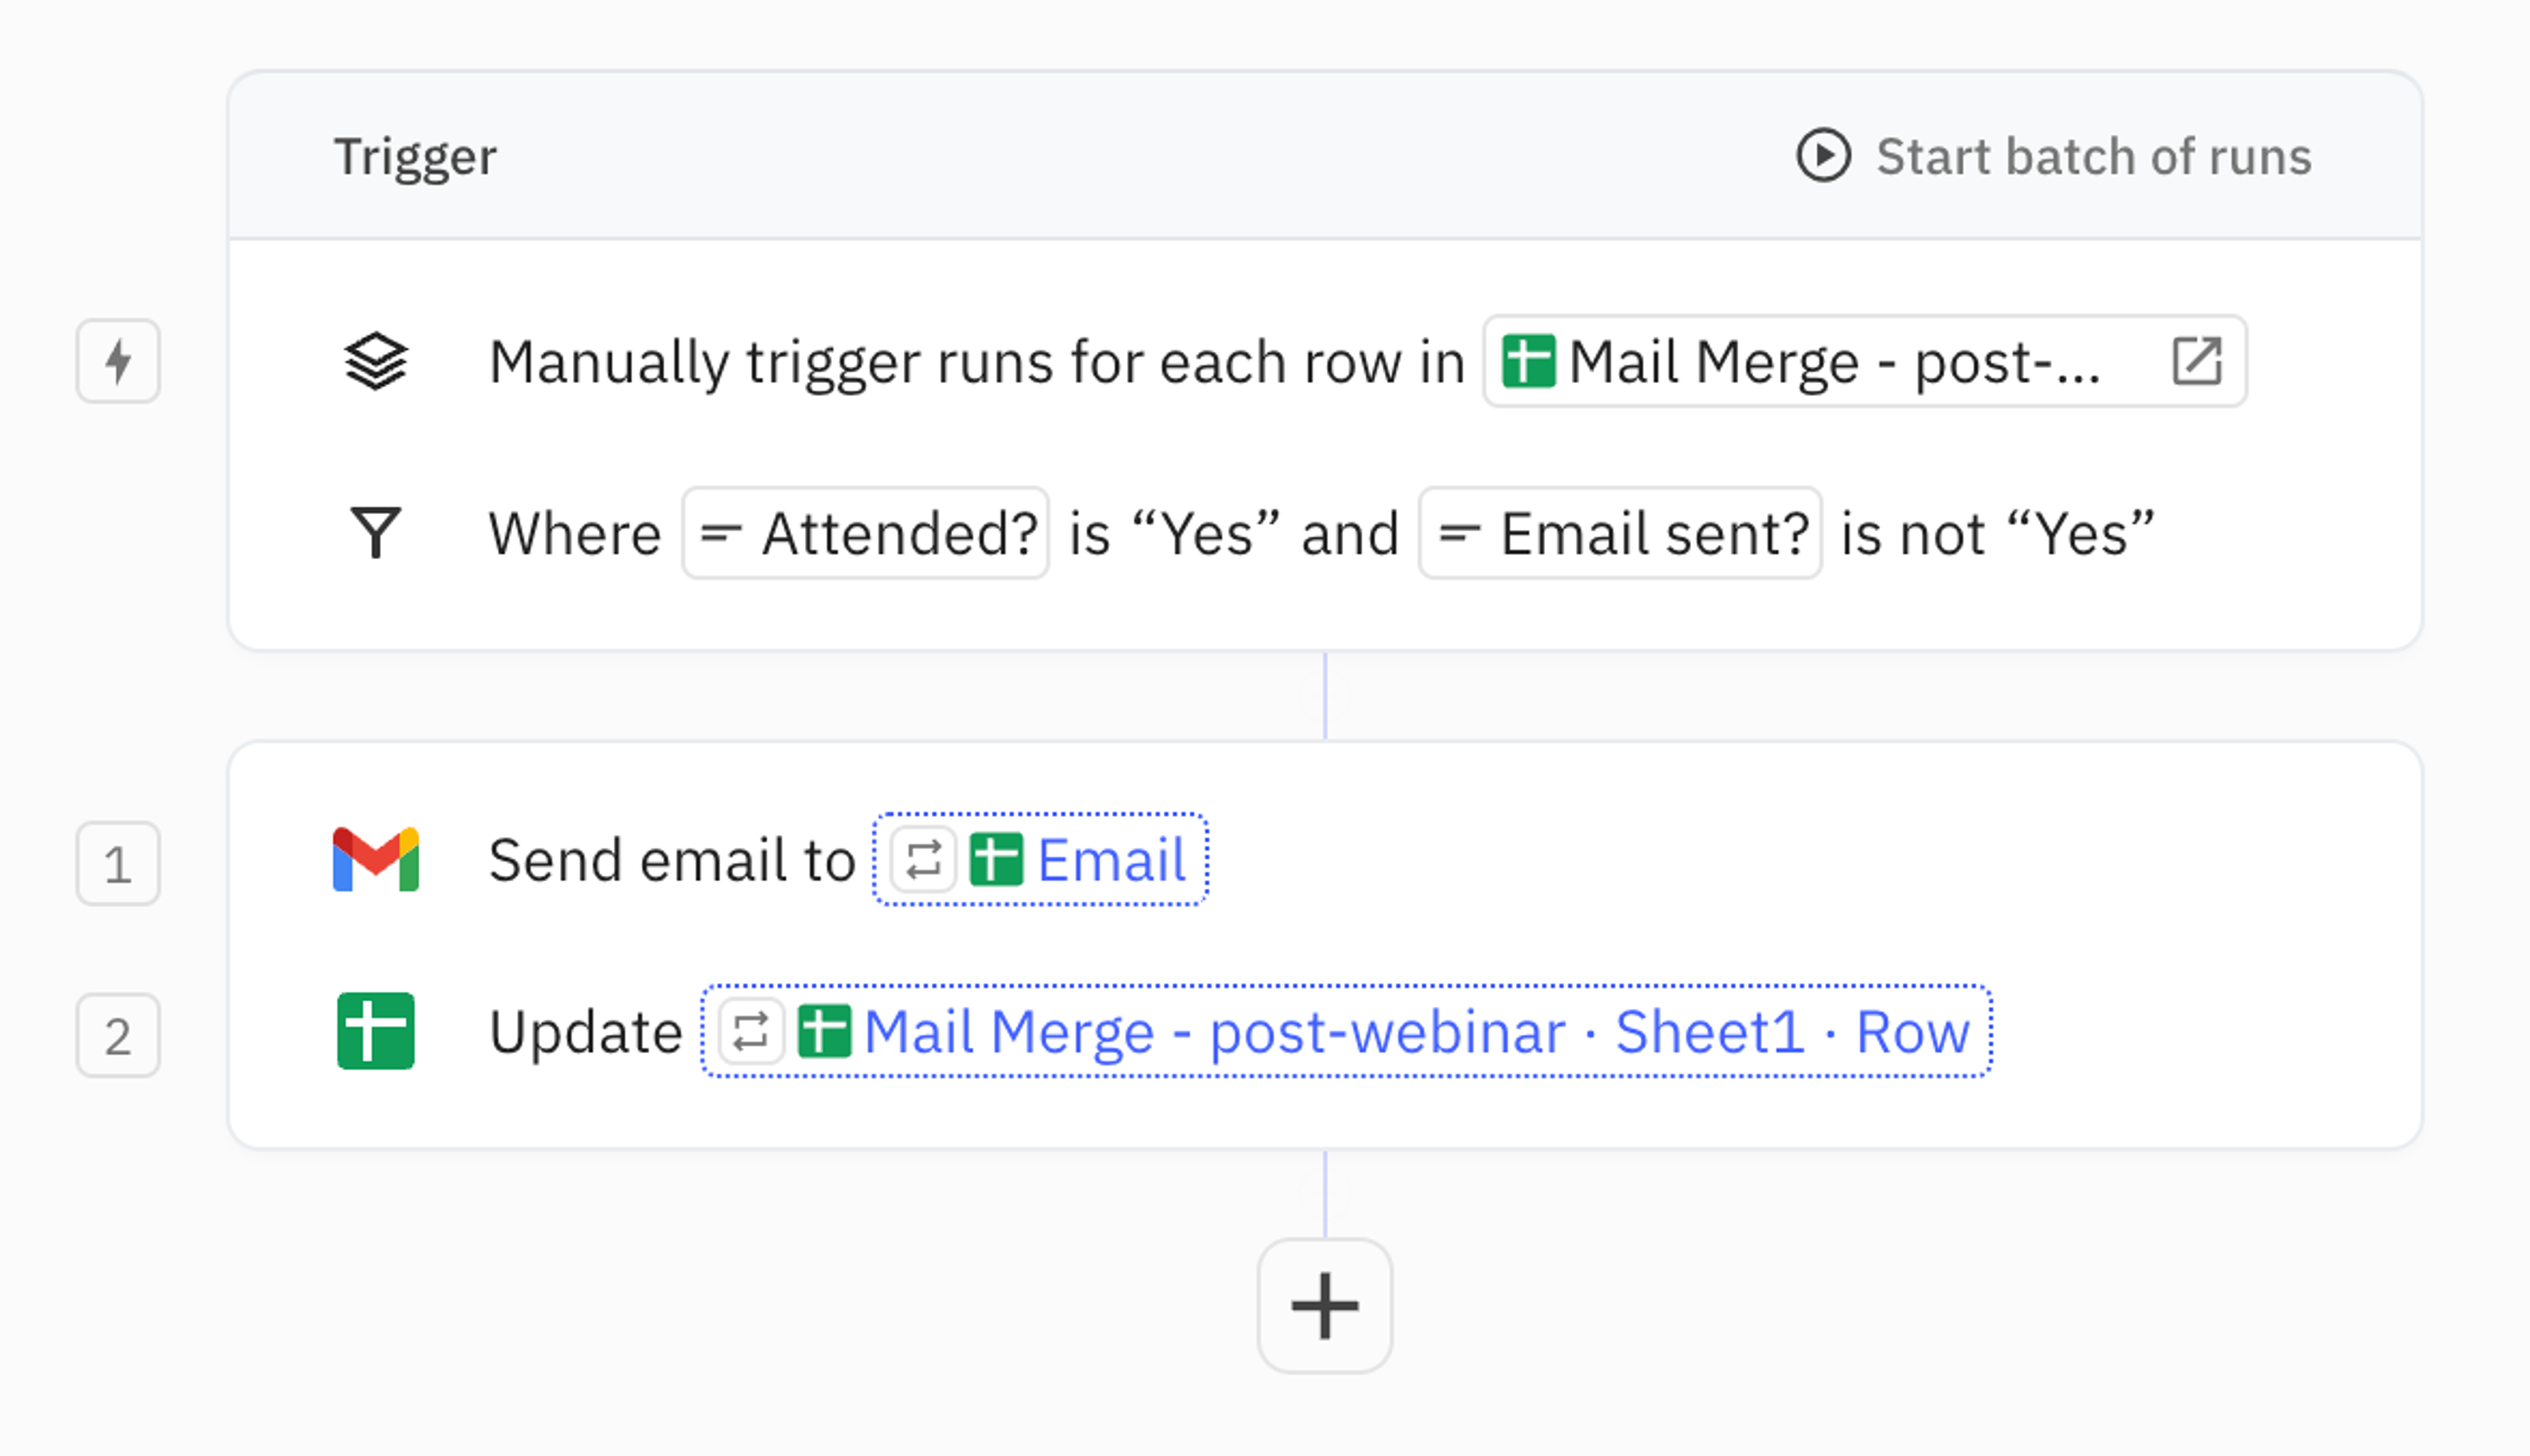 You can use Batch Triggers in Relay.app to create a mail merge playbook using Gmail and Google Sheets